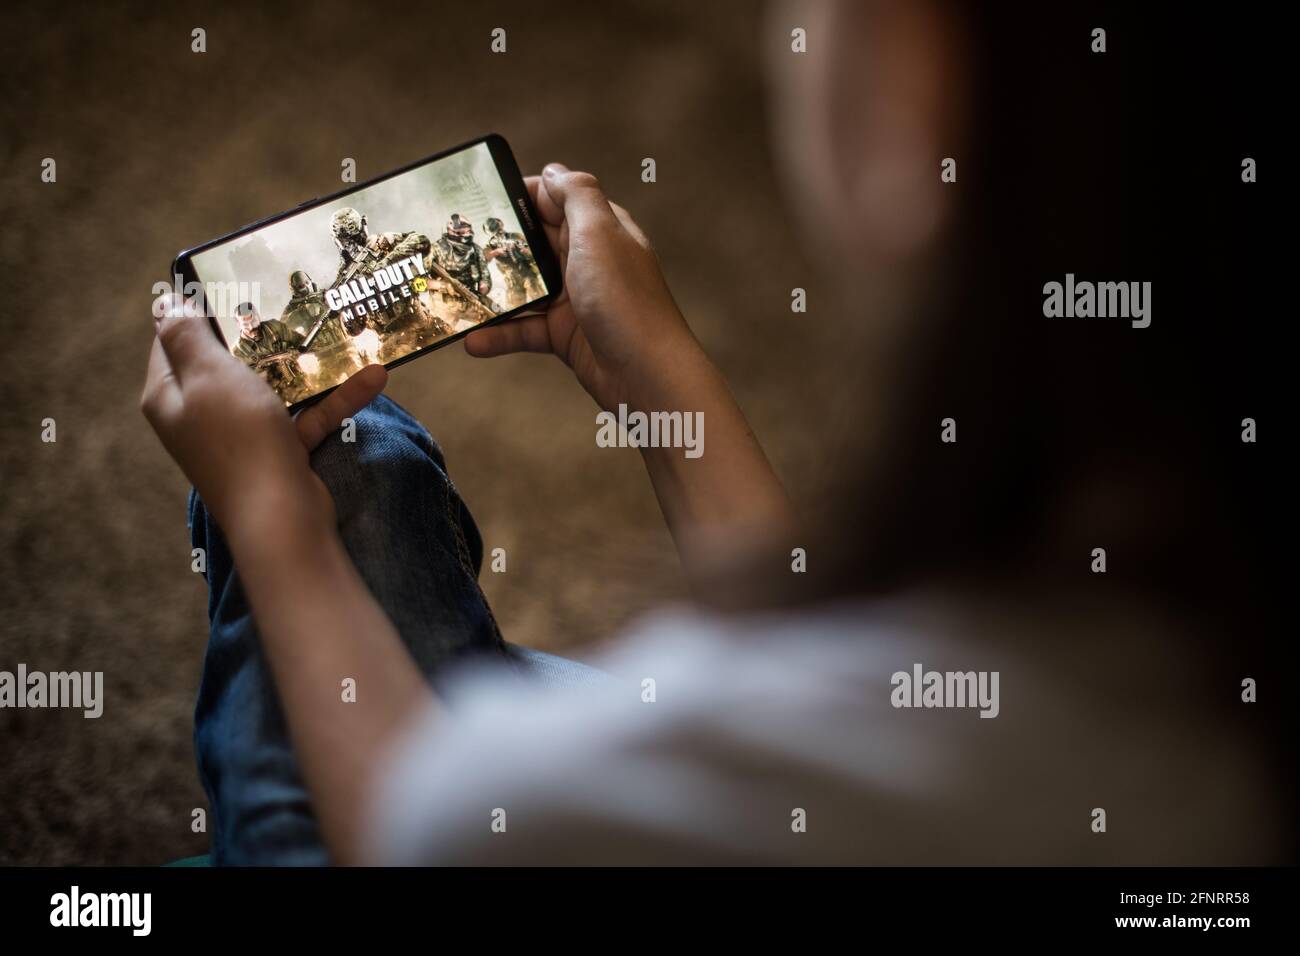 Bucharest, ROMANIA - May 10, 2021: Illustrative editorial concept image of a child playing Call of Duty game on a mobile phone. Stock Photo